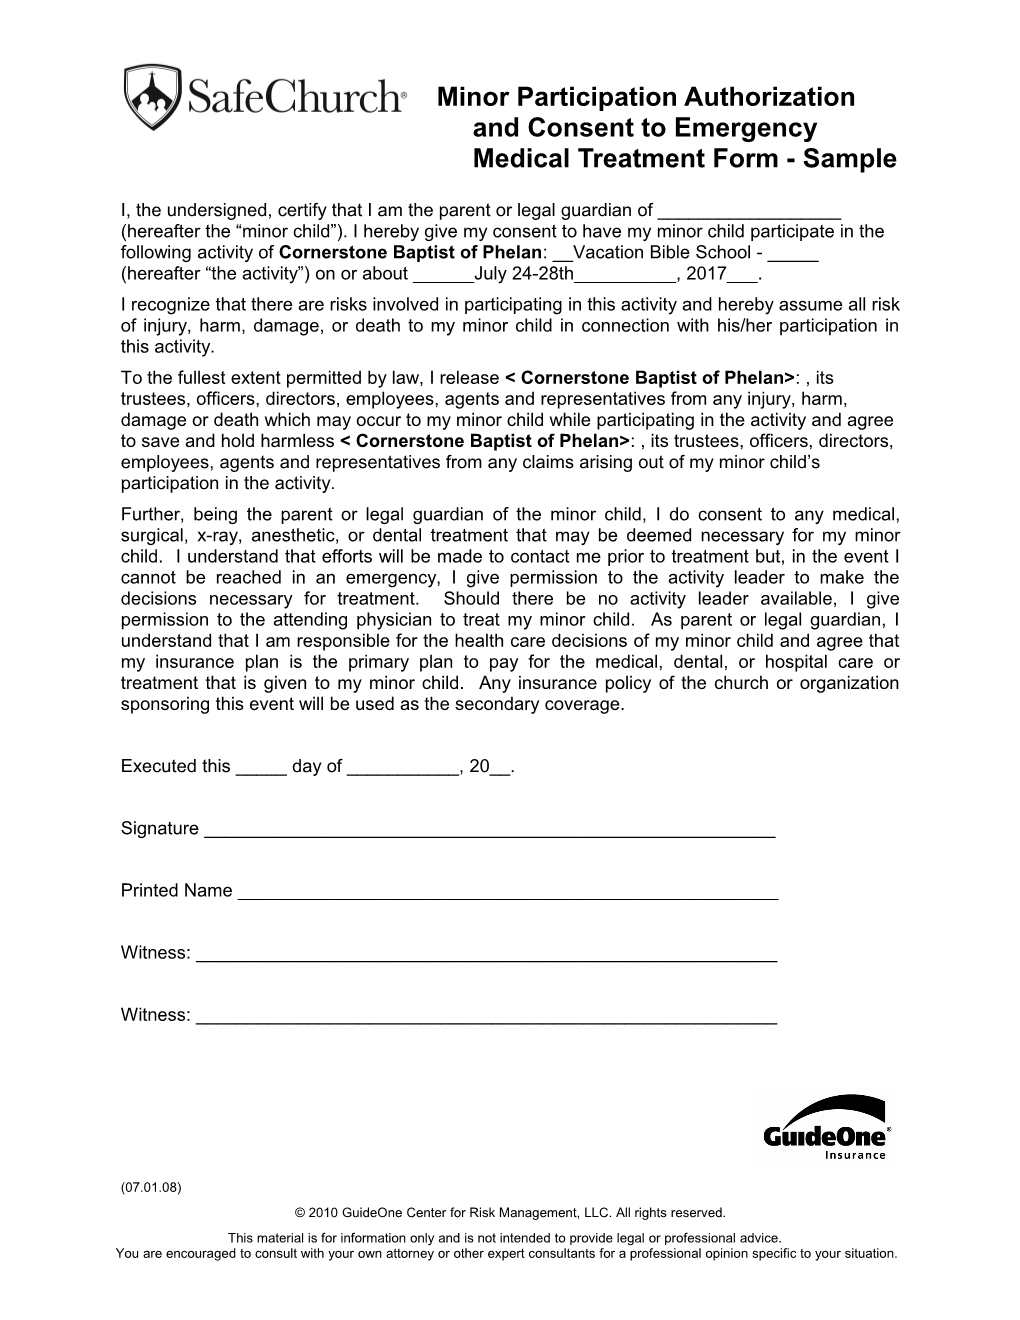 Minor Participation Authorization & Consent to Emergency Medical Treatment (Customizable)